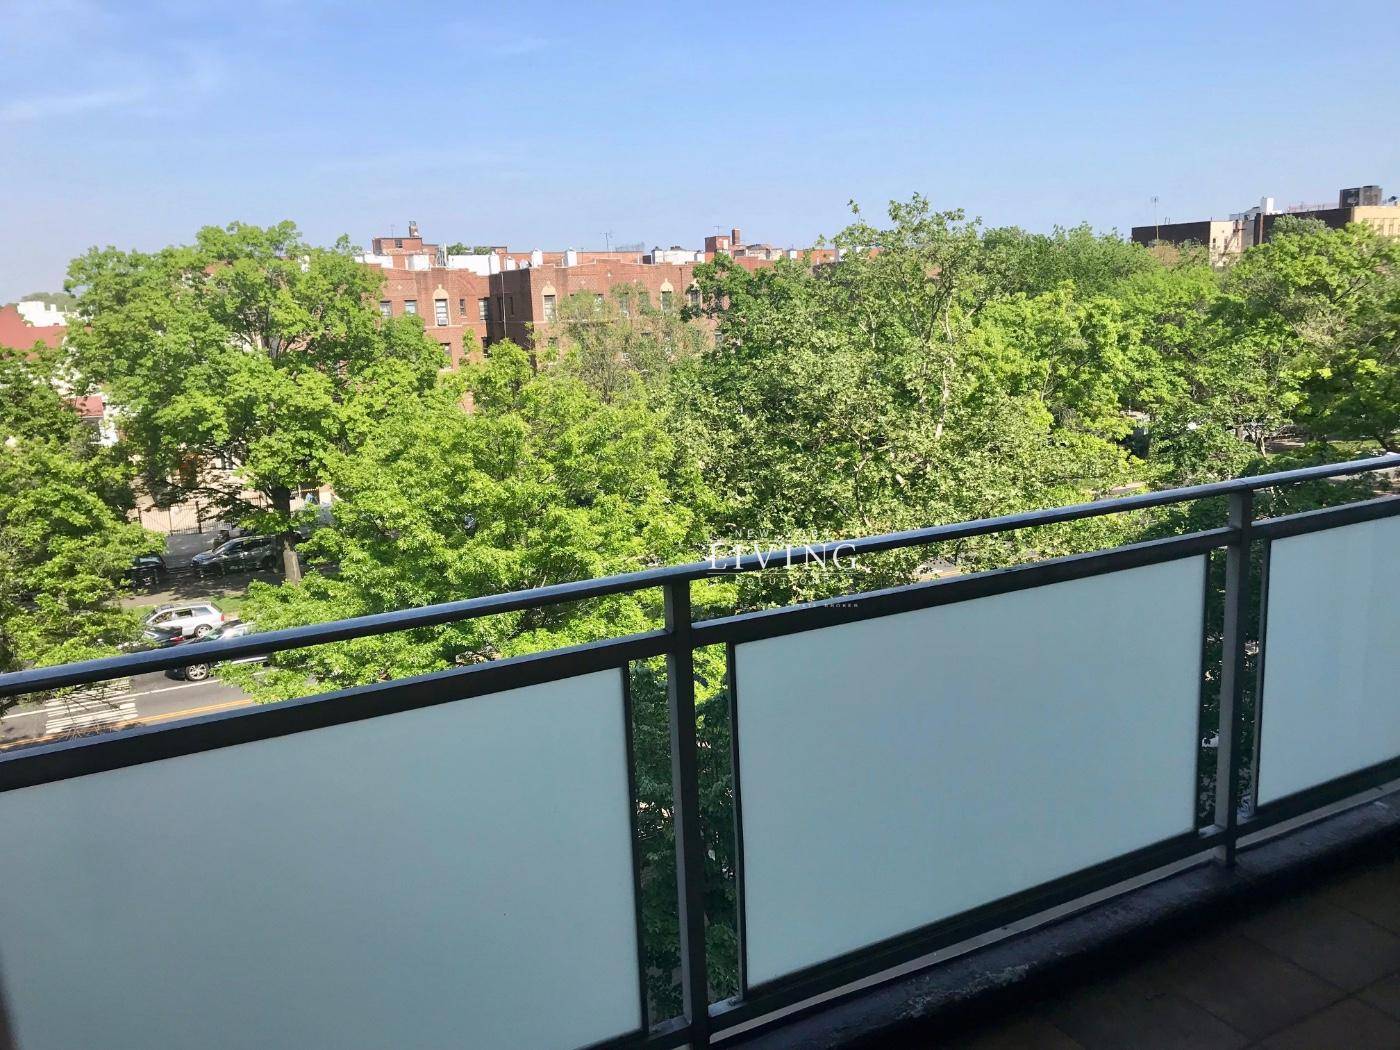 Welcome to apartment 5D located at 350 Ocean Parkway, one of Kensingtons most desirable cooperative buildings.